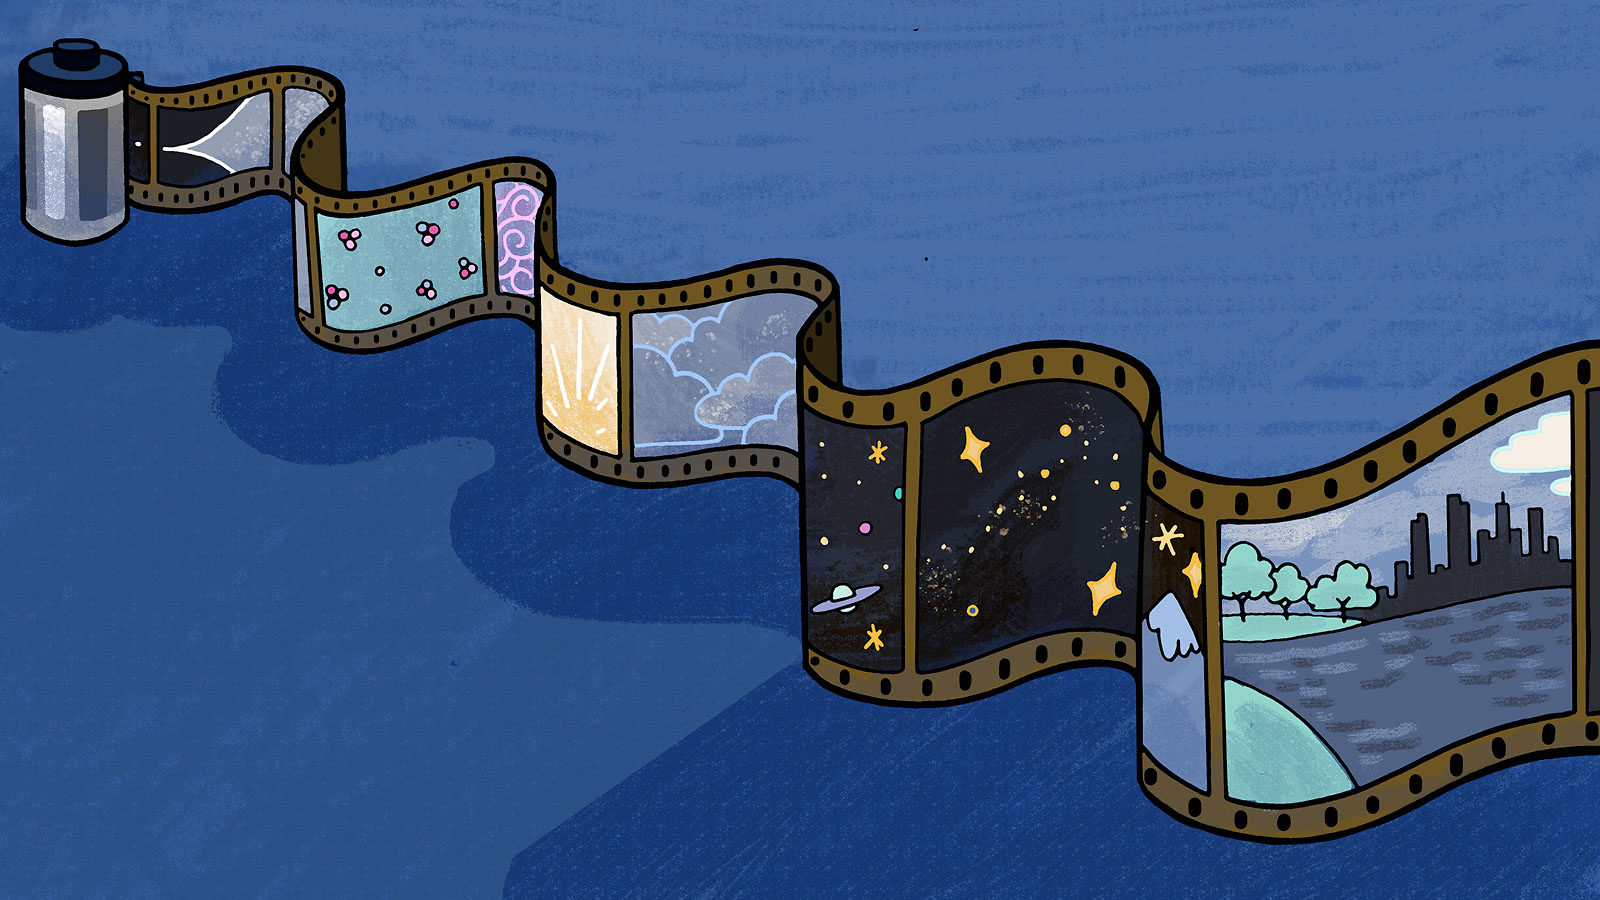 An illustration of a filmstrip cotaining images representing stages of the early universe